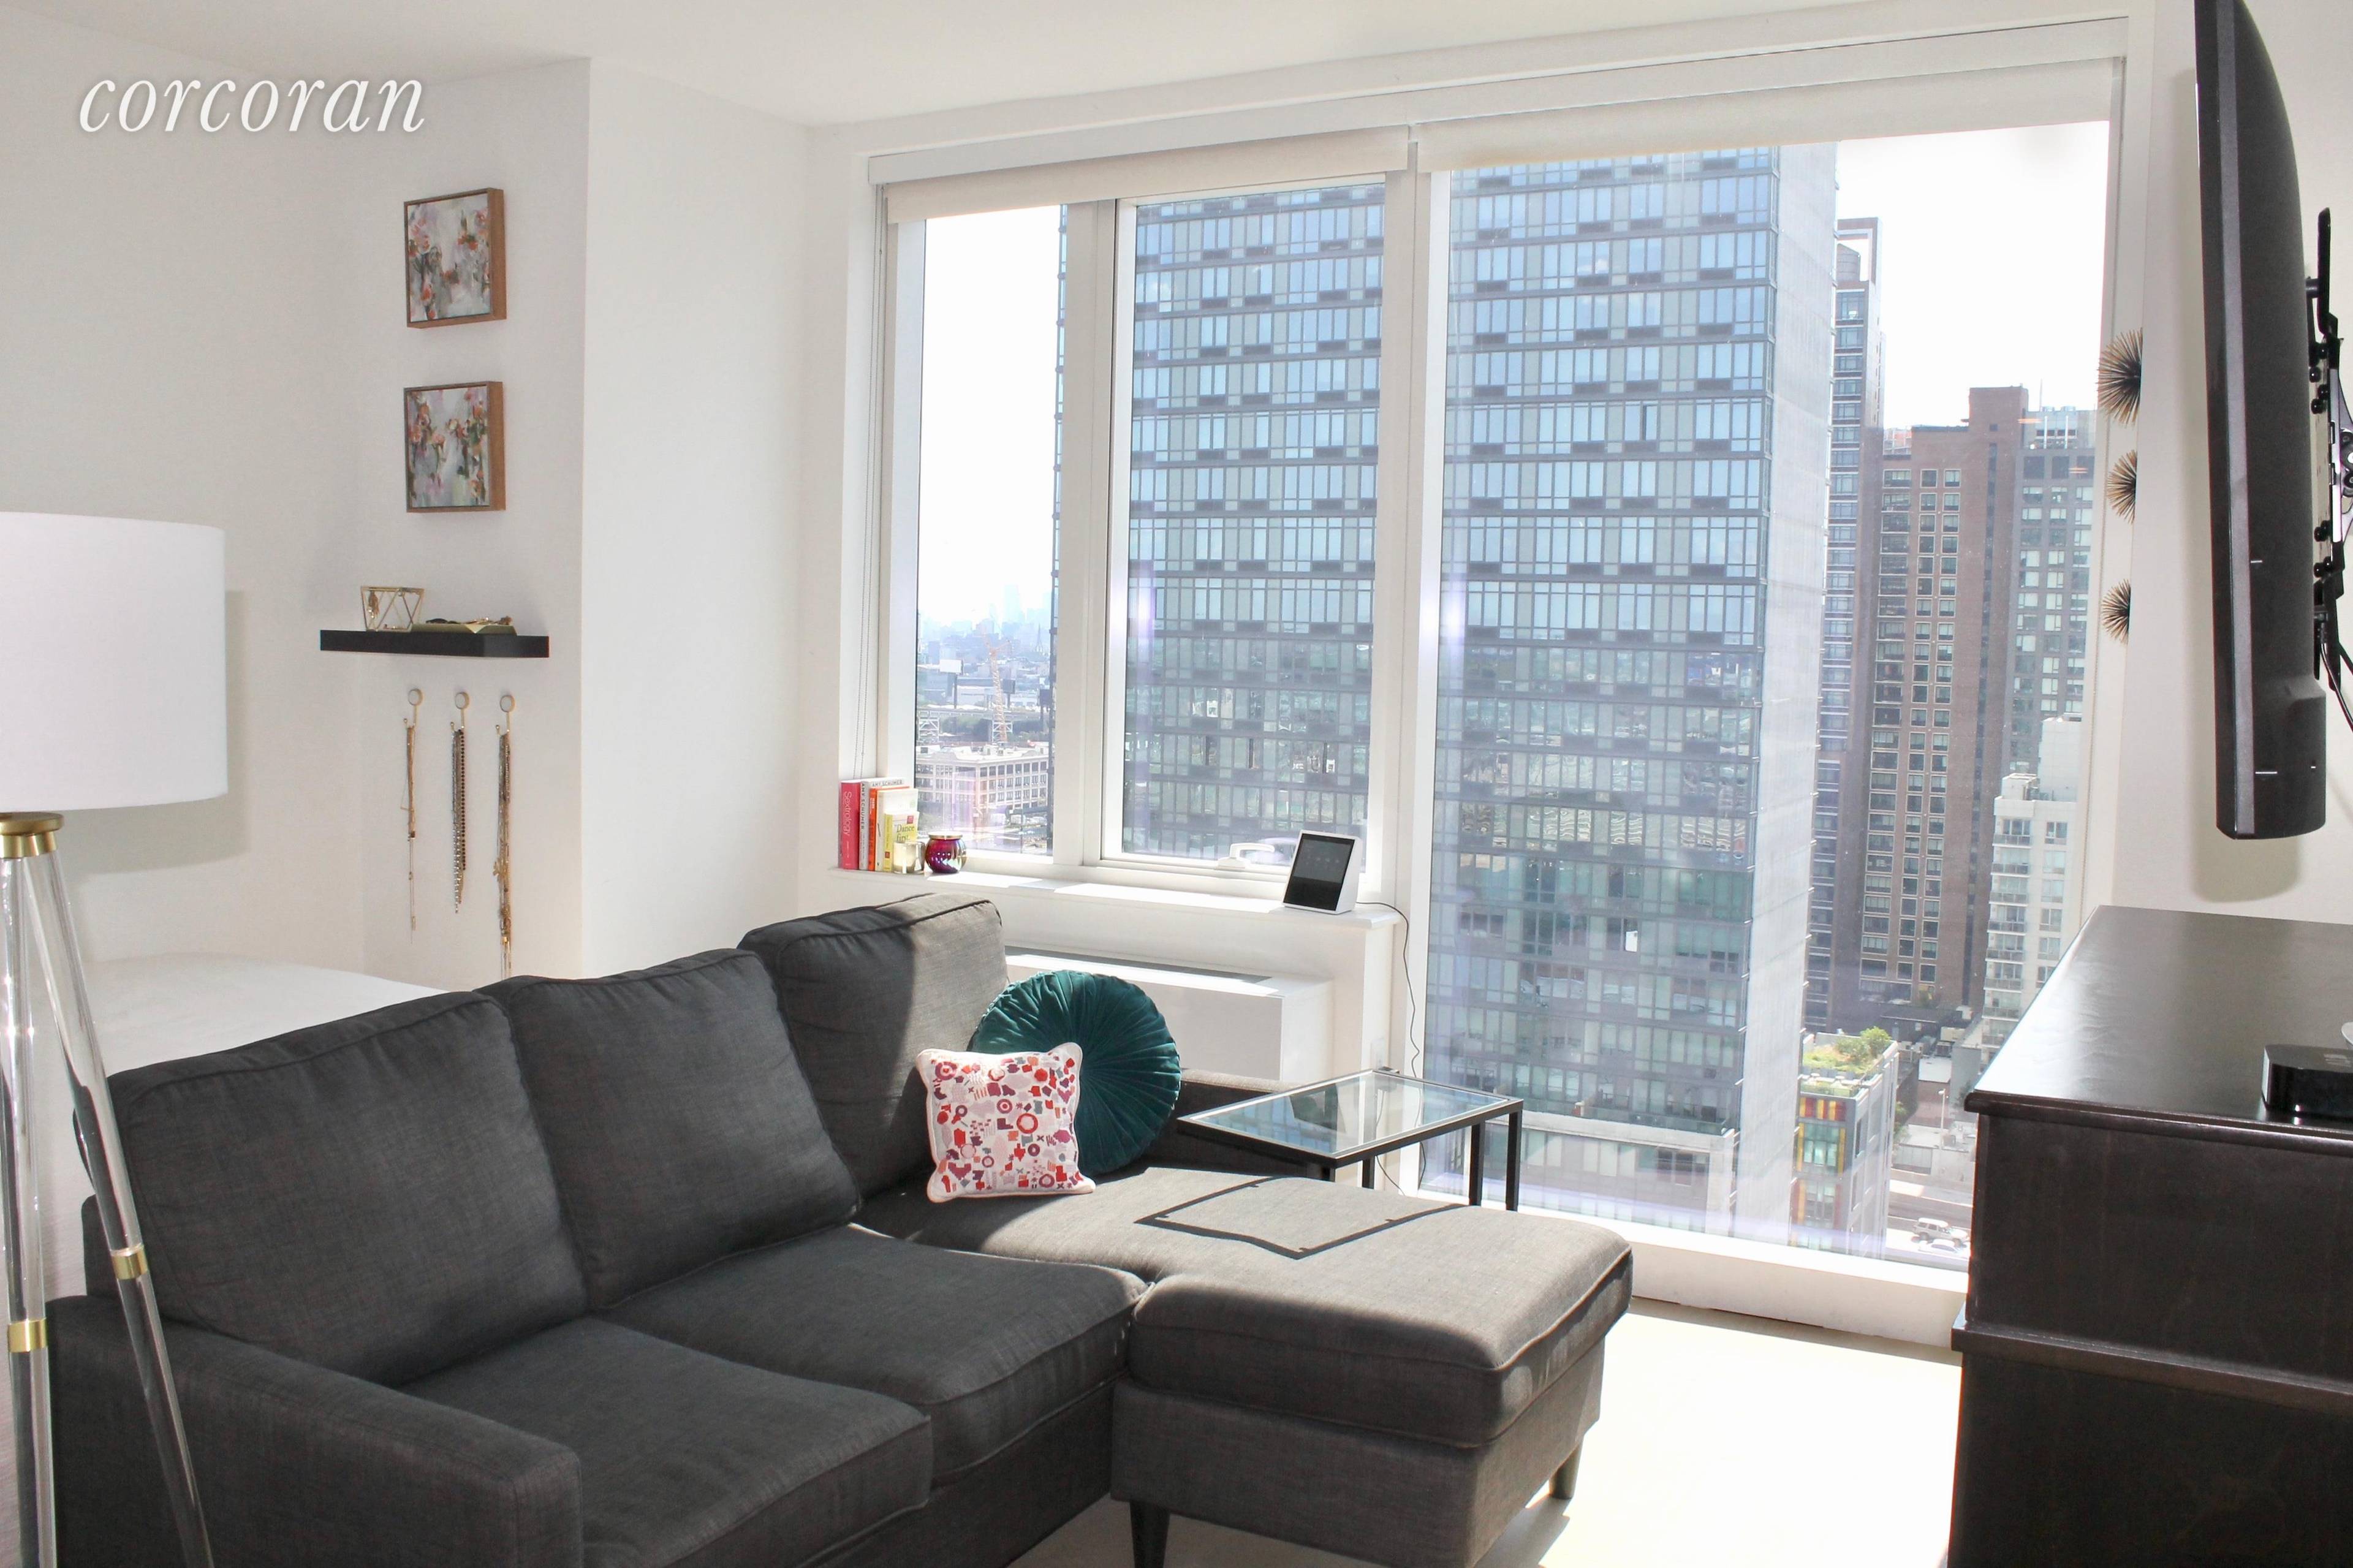 NO FEE ! ! Rent Stabilized Lease Assignment 7 months with option to renew This bright and modern studio in the the sought after luxury rental development, Jackson Park, has ...